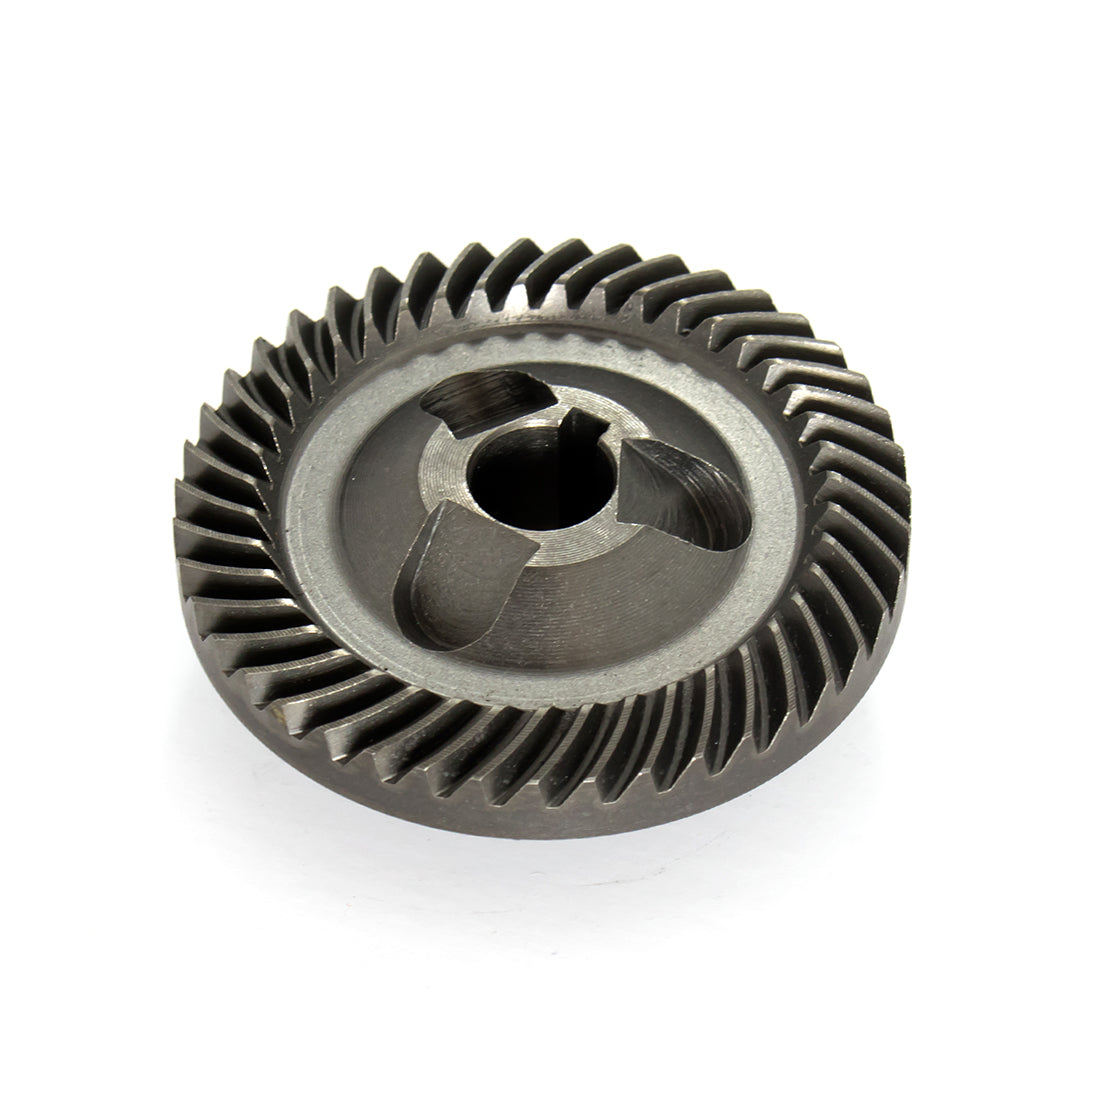 [MBA-008] Large gear - (For Polisher)